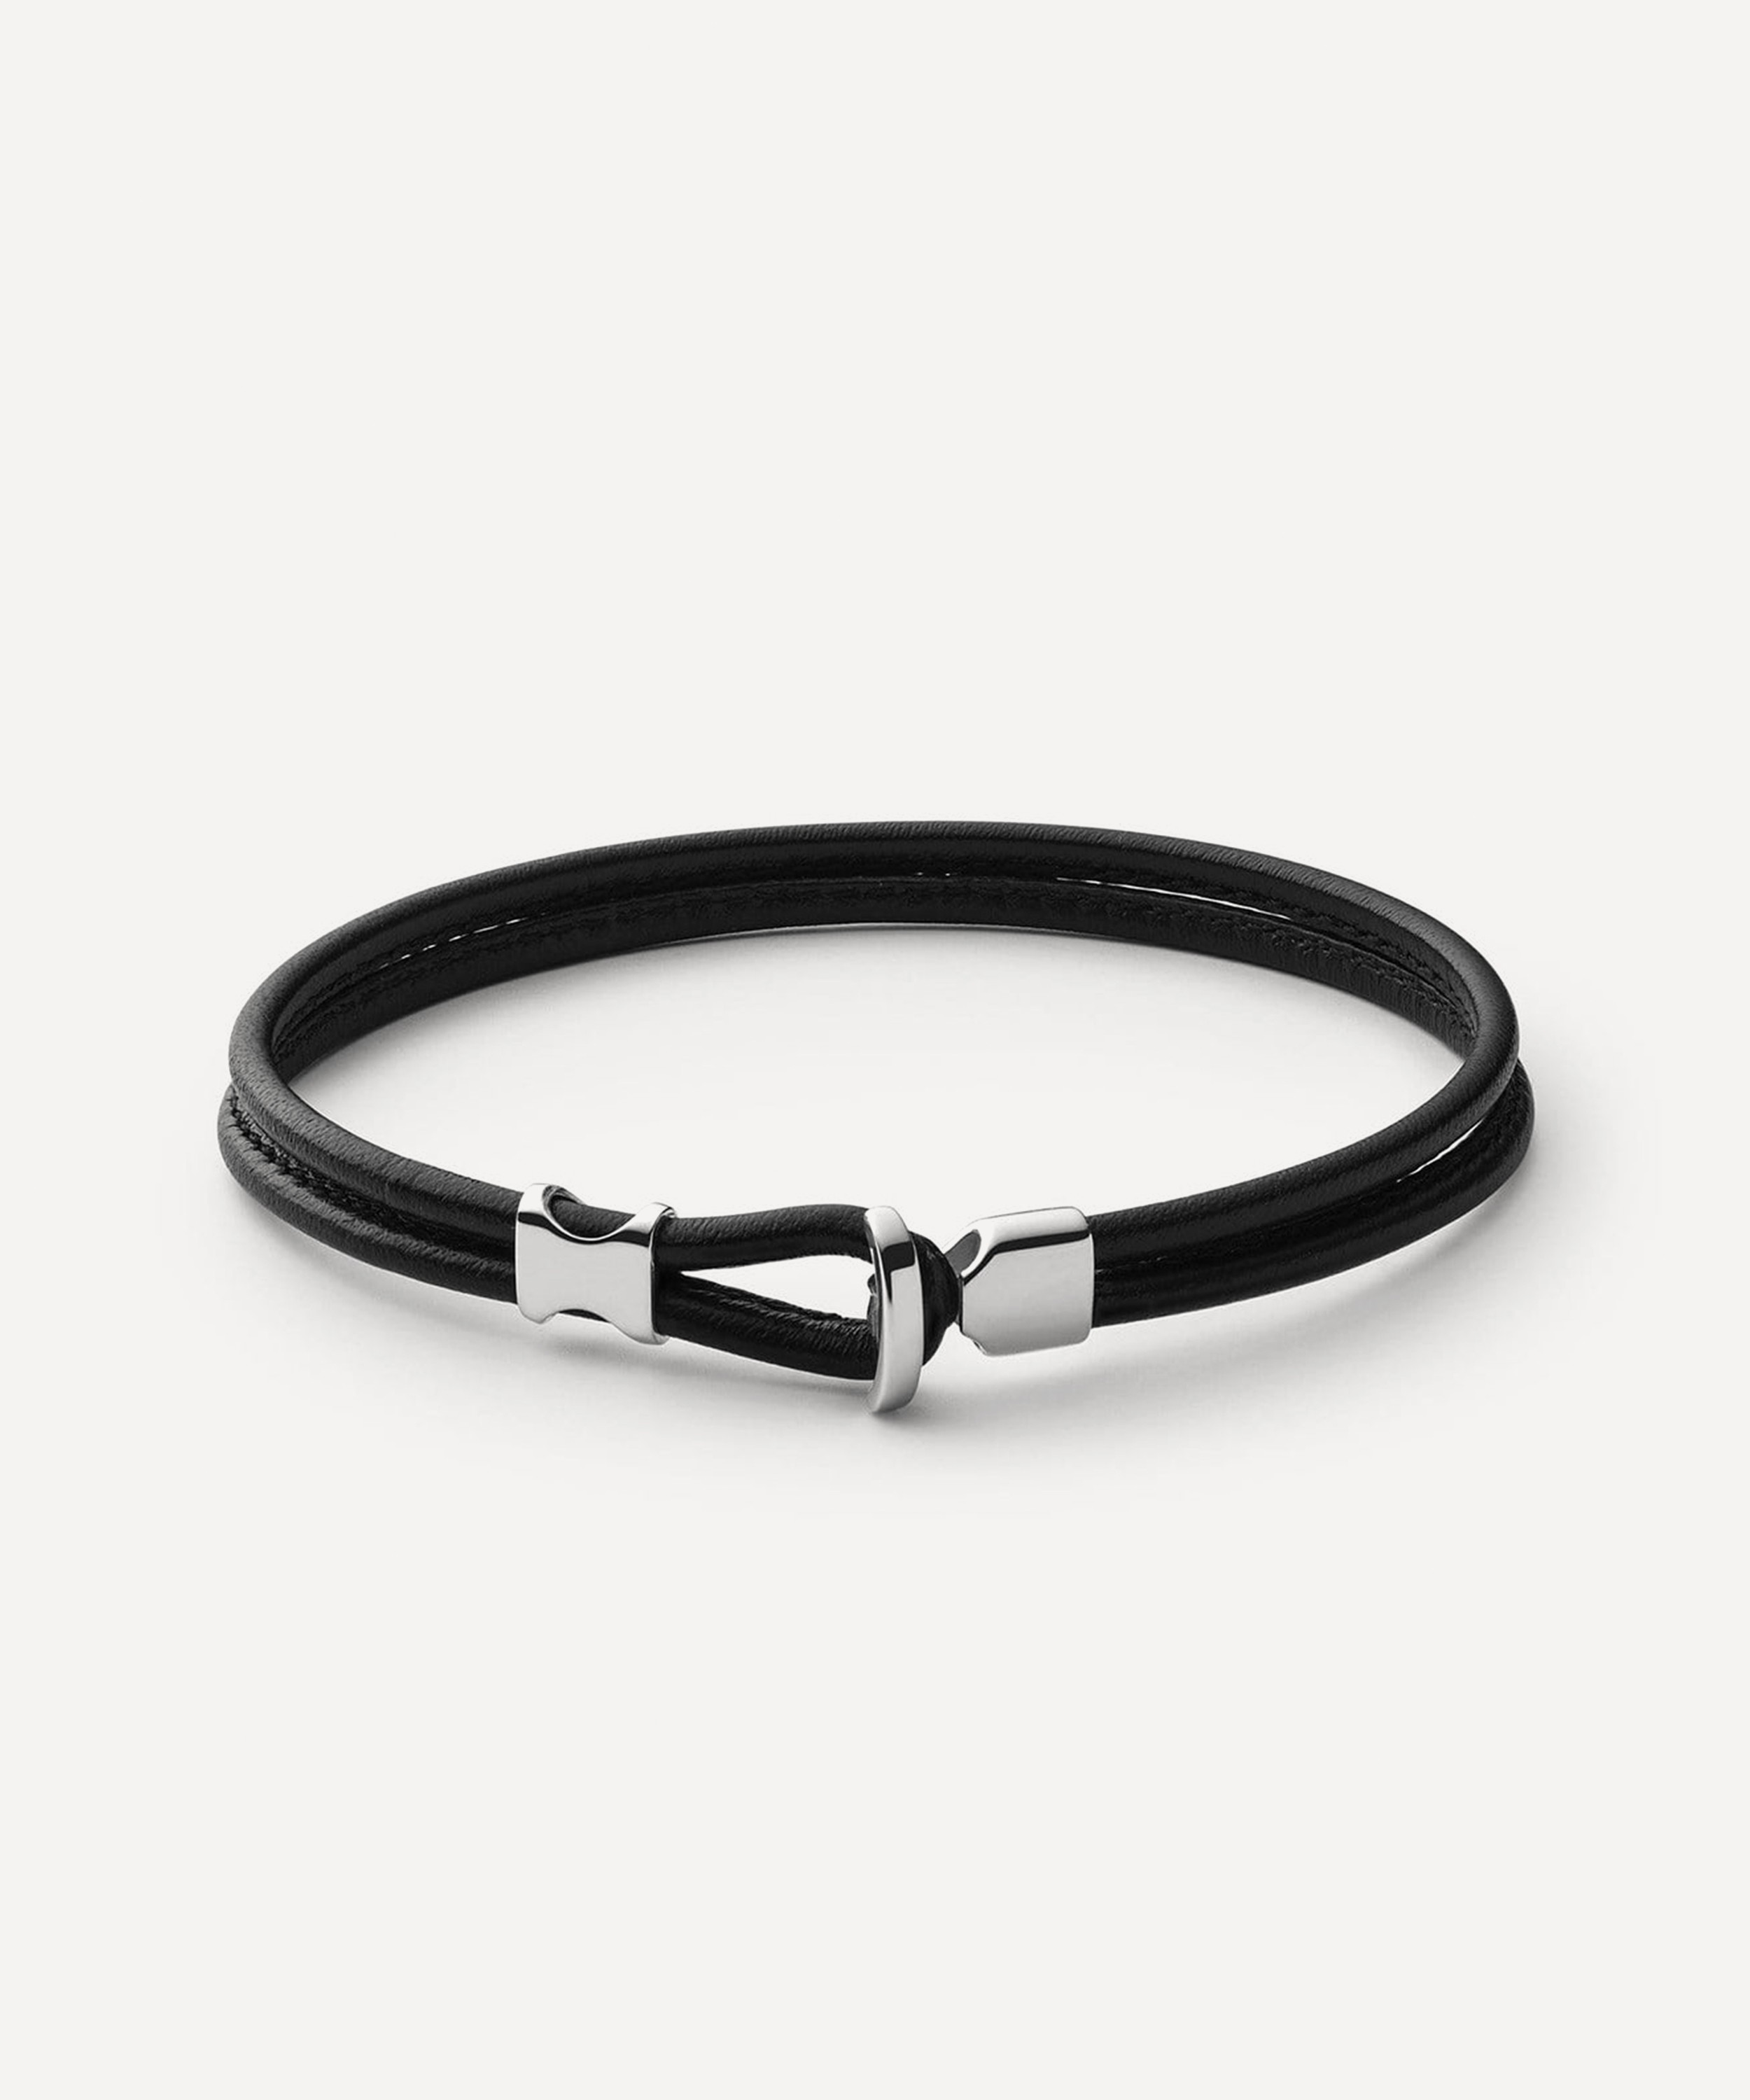 Men's Wrap Leather Bracelet with Silver Fish Hook Clasp - Atolyestone